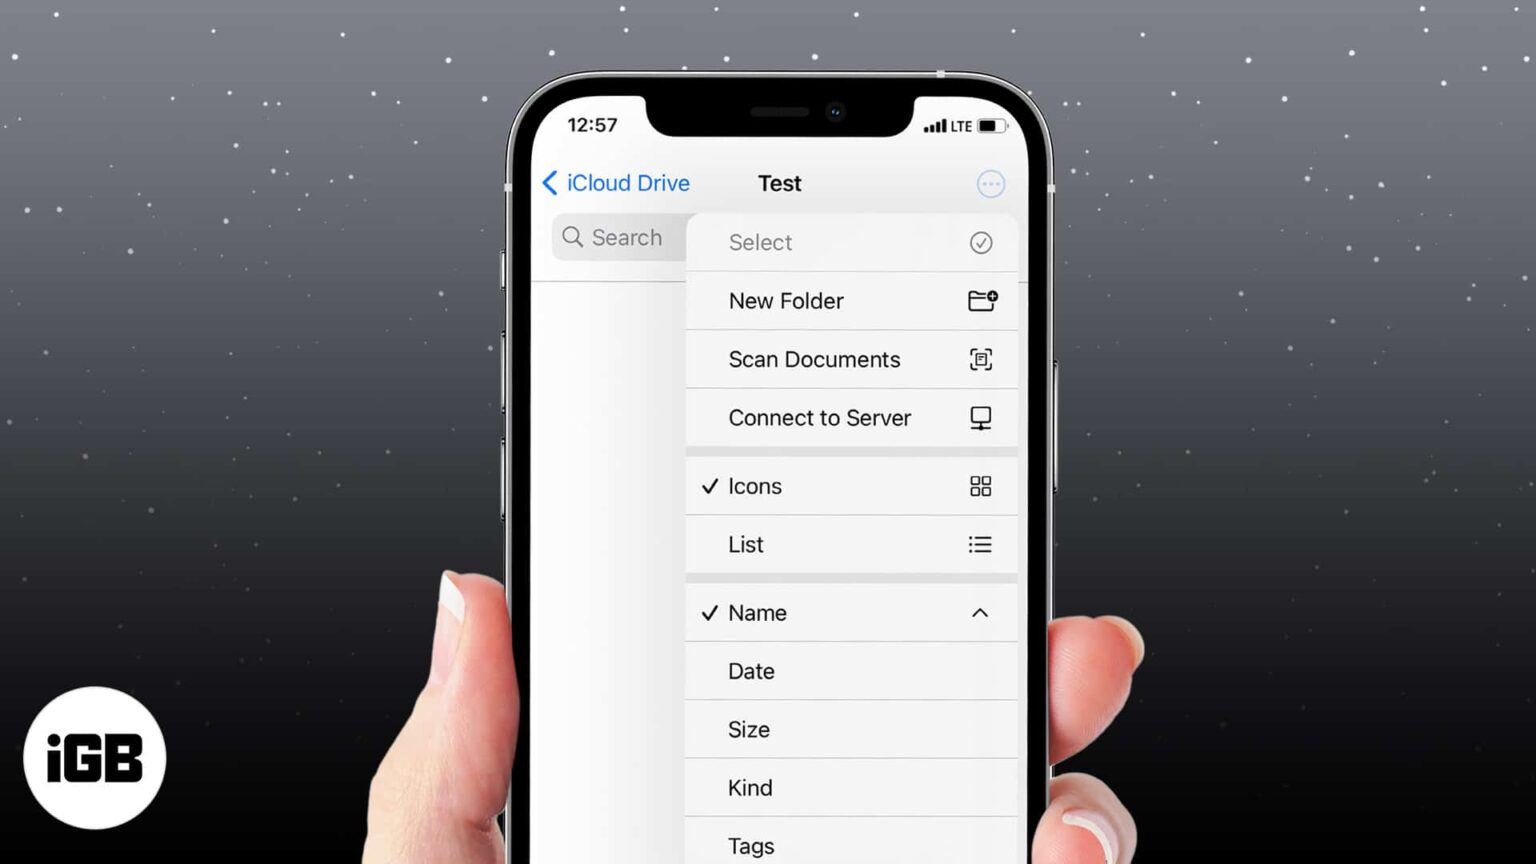 How to scan documents on iPhone using the Files app